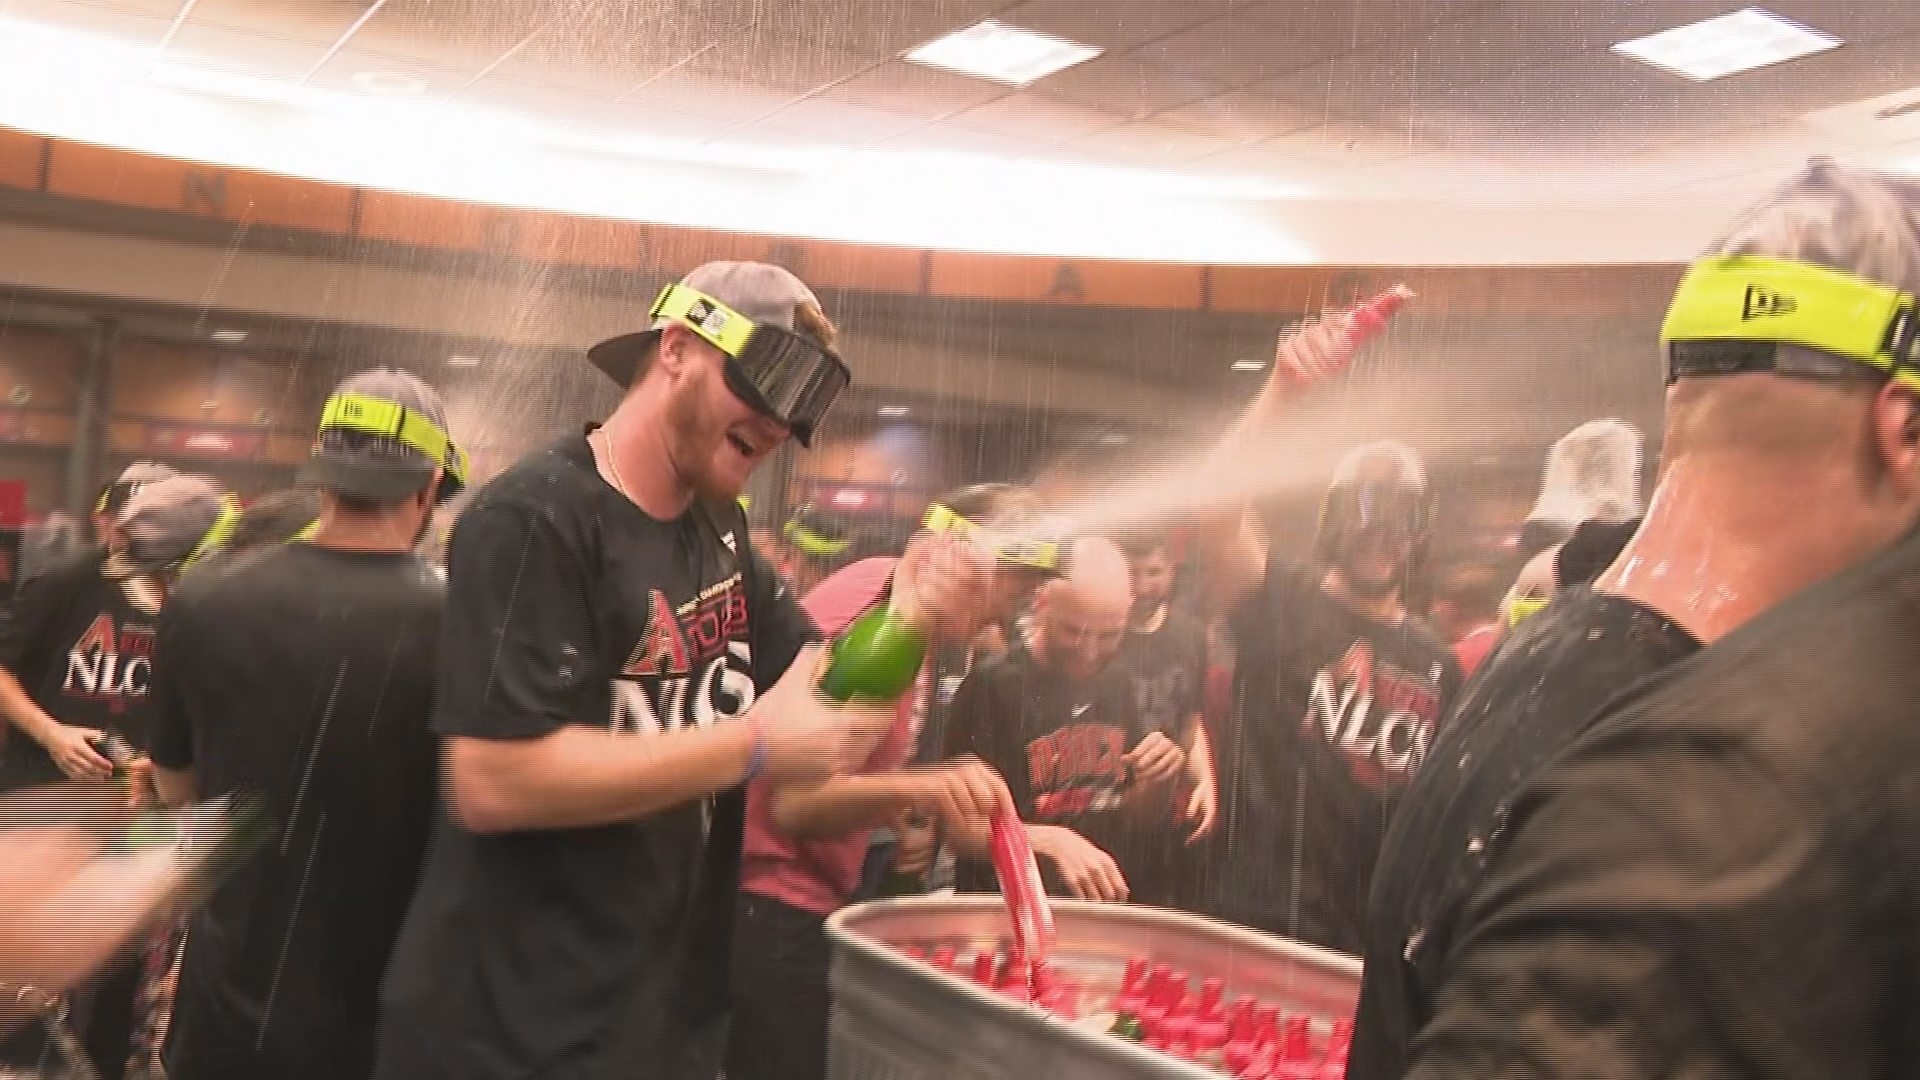 The D-backs celebrated their NLDS sweep of the Dodgers by spraying champagne in the team clubhouse. Here's a look at the celebration